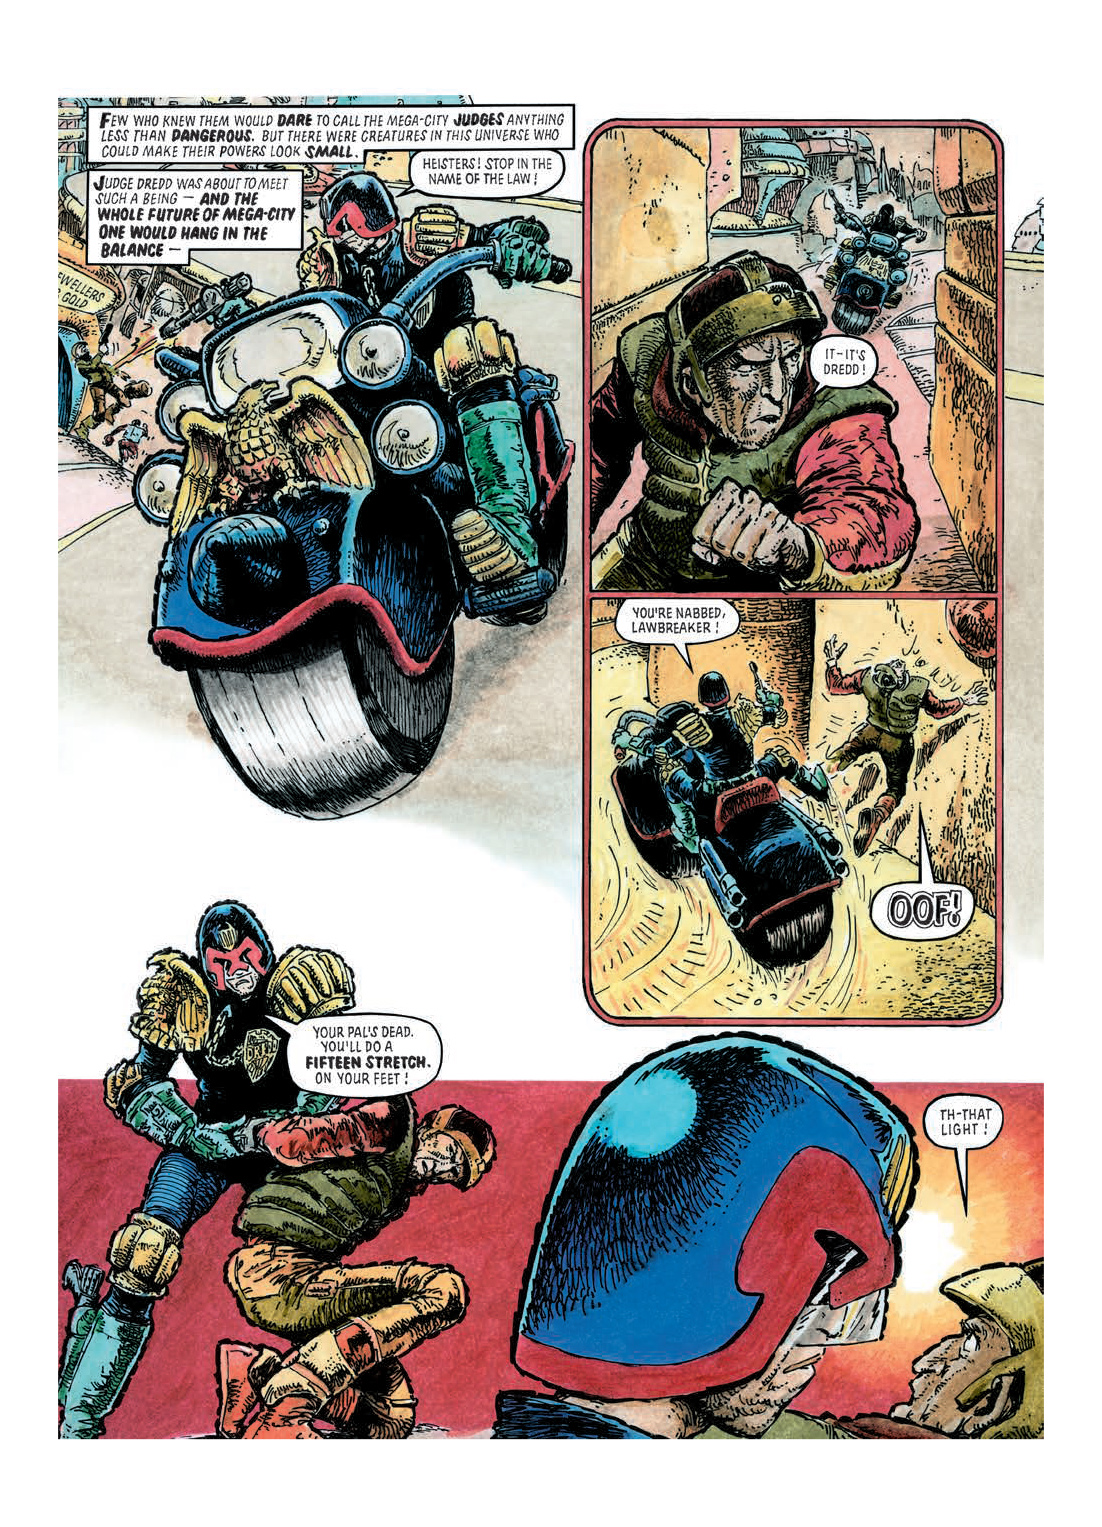 Read online Judge Dredd: The Restricted Files comic -  Issue # TPB 1 - 182